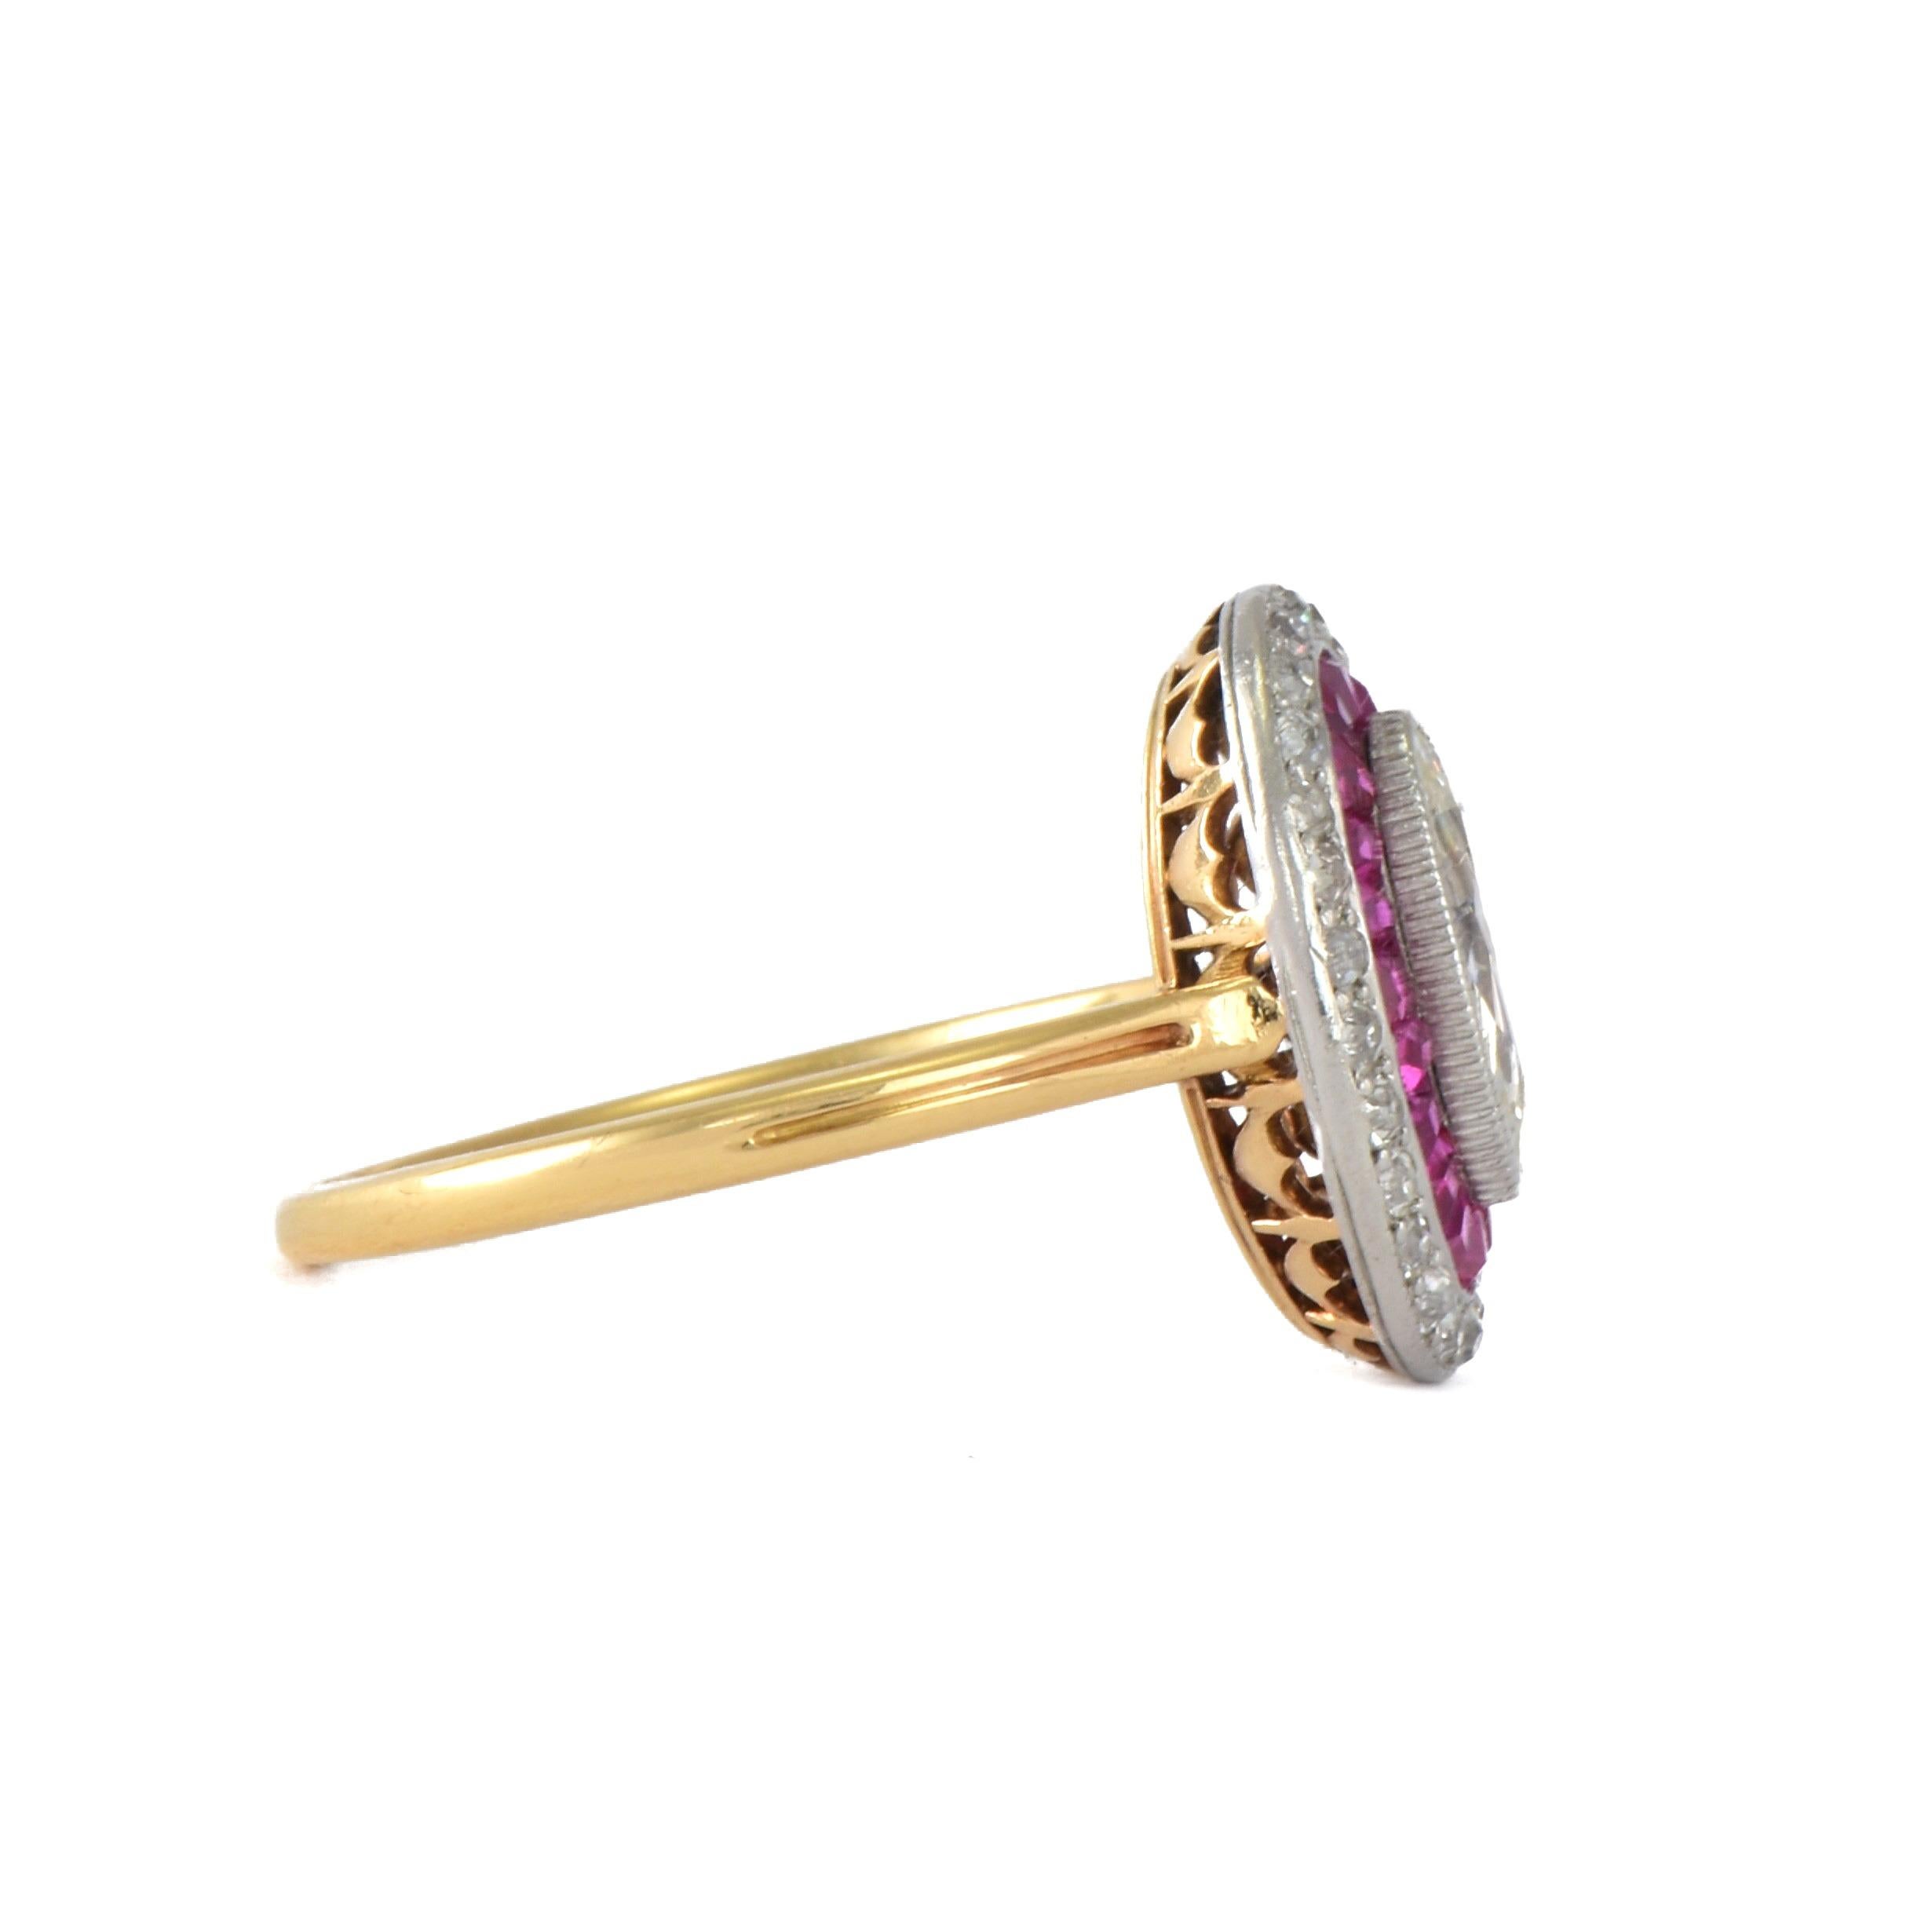 Superb Edwardian period marquise ring.

 

Expertly crafted from 18k gold and platinum with carved gallery.

 

The ring features a old cut marquise diamond in milgrain setting. This is surrounded with Exceptional caliber cut rubies and further